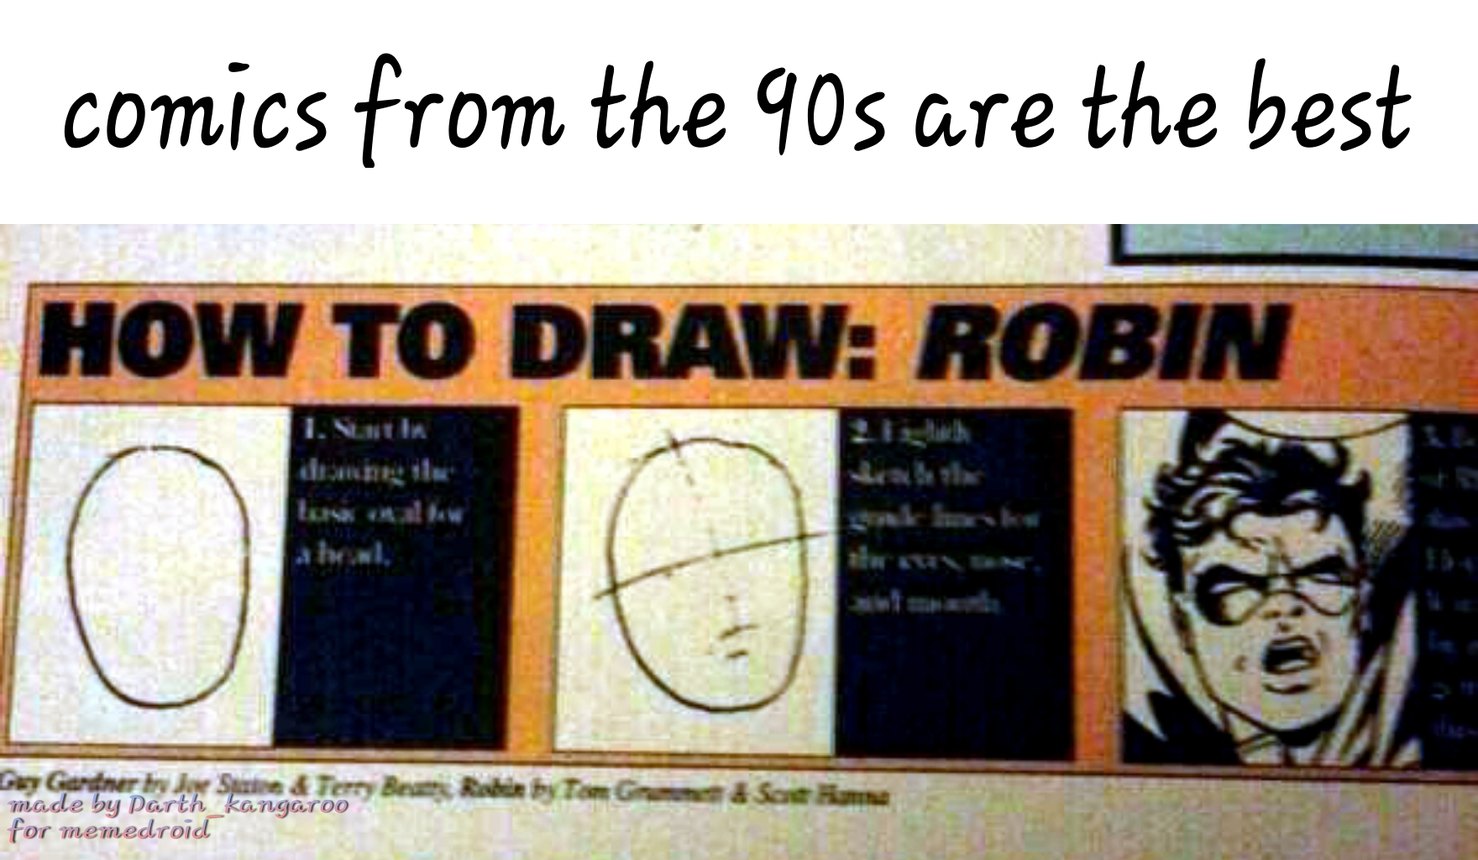 Just kidding the 90s were actually shit for comics - meme